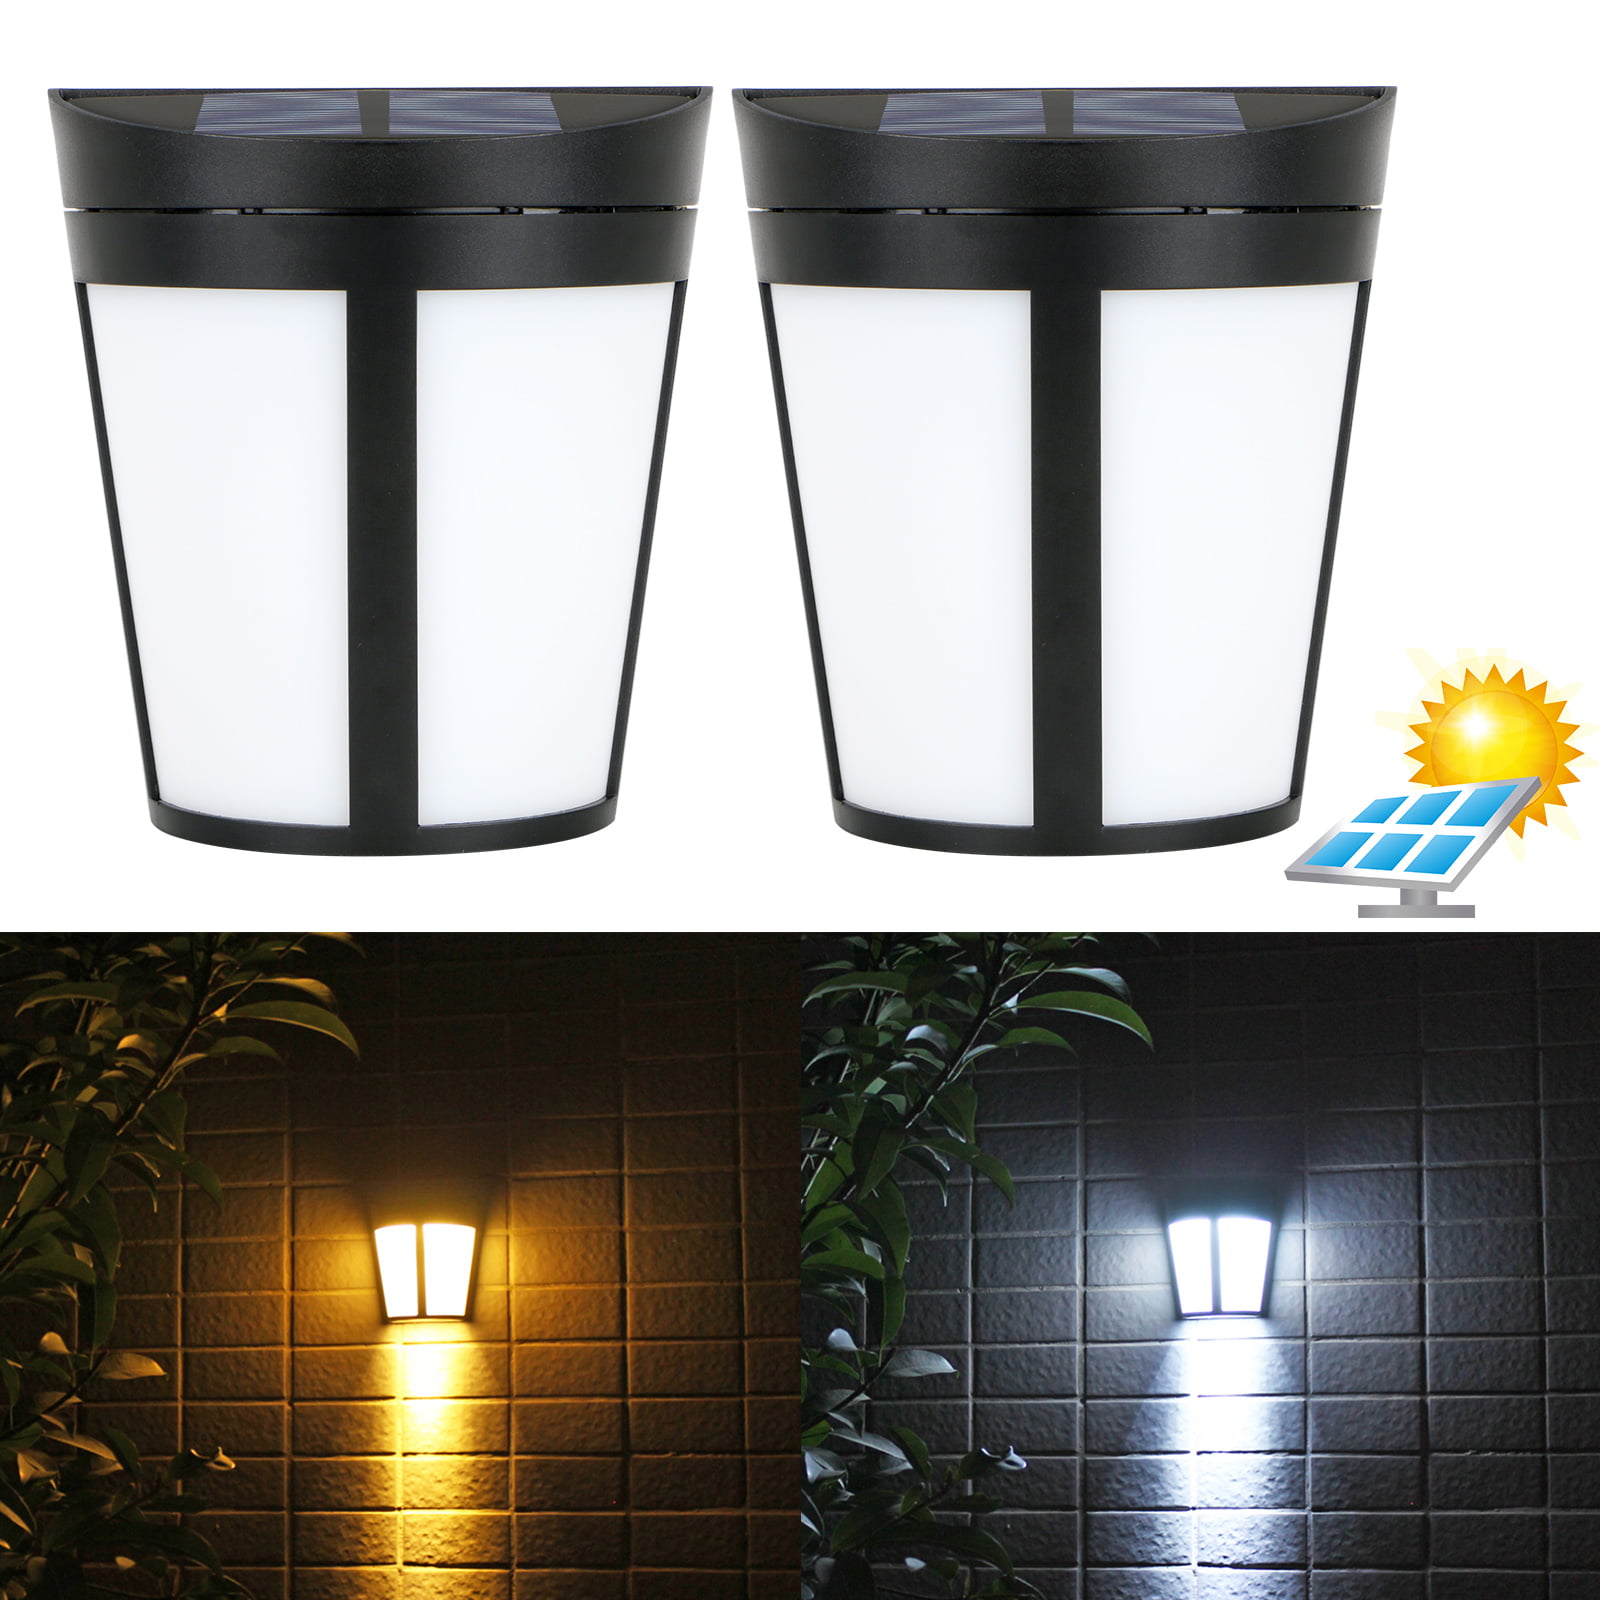 2Solar Powered LED Fence Deck Wall Lights Outdoor Garden Lighting Warm White 